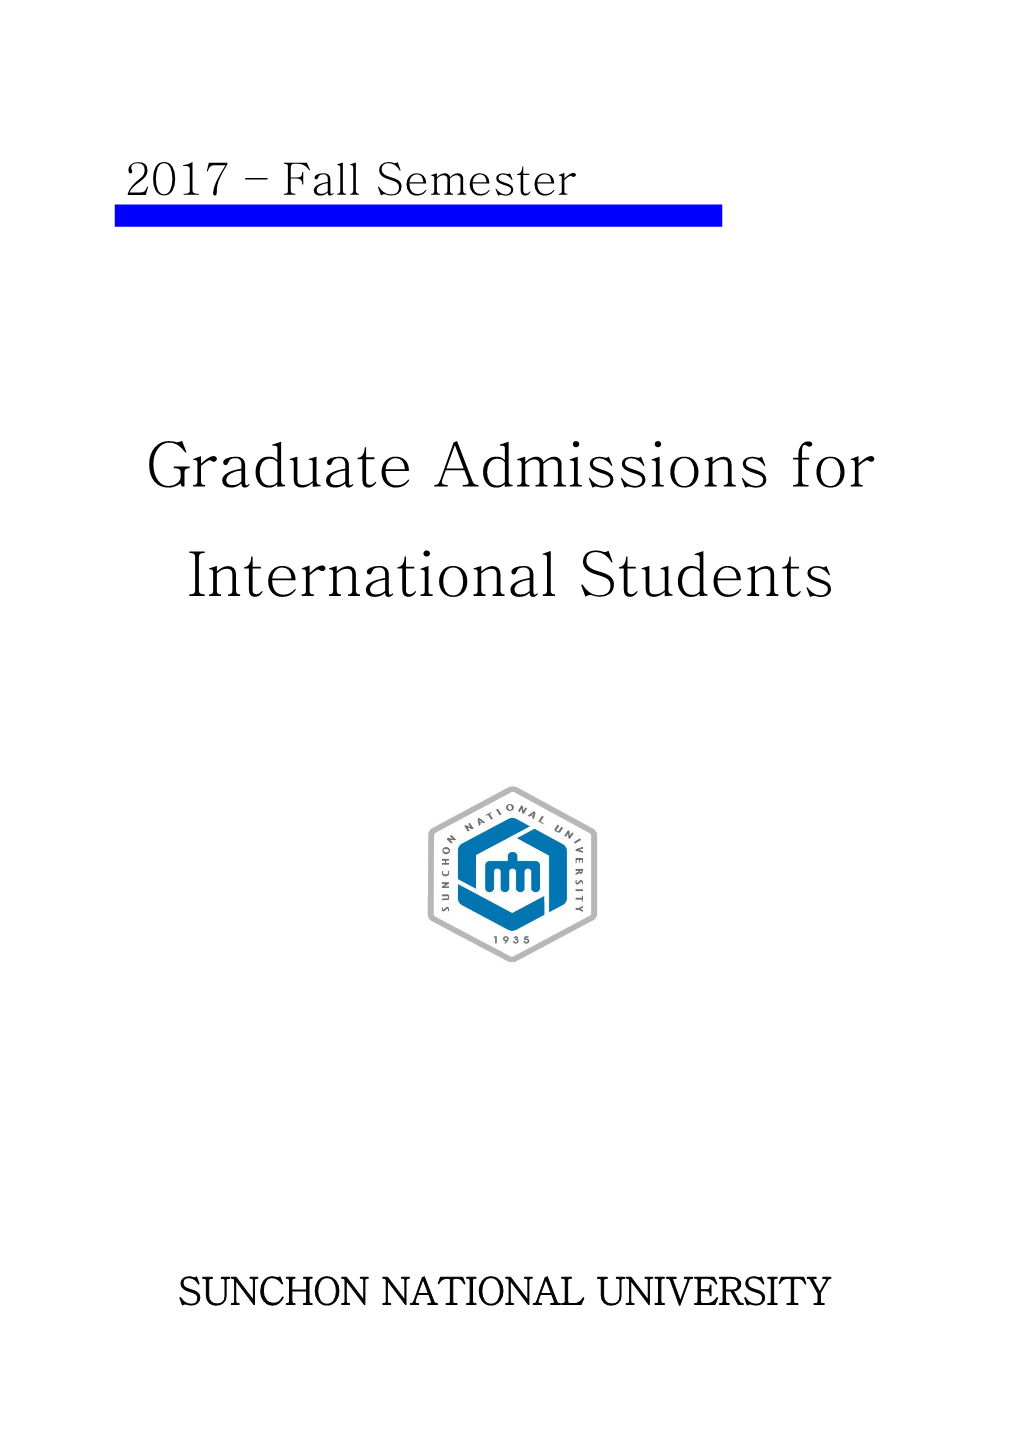 Graduate Admissions For